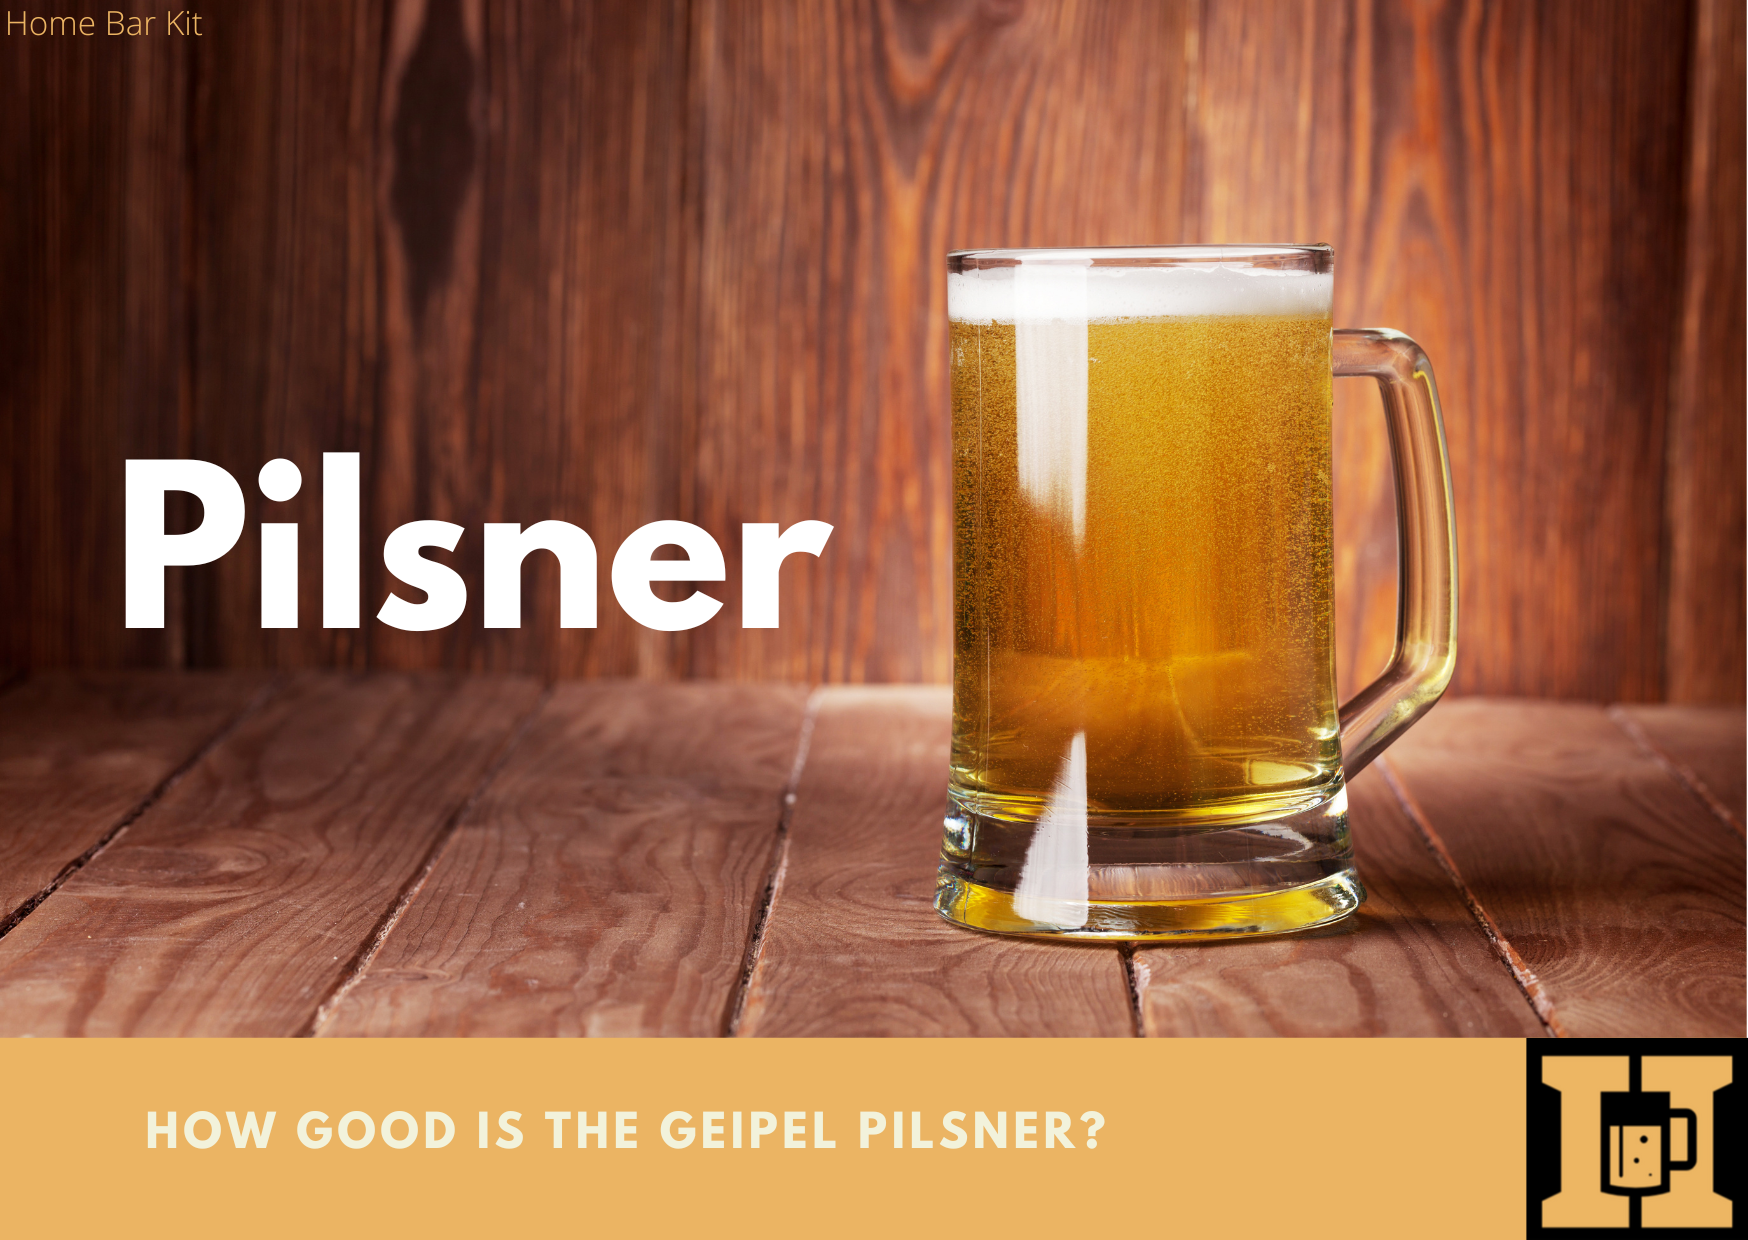 A Pilsner From Geipel Brewery